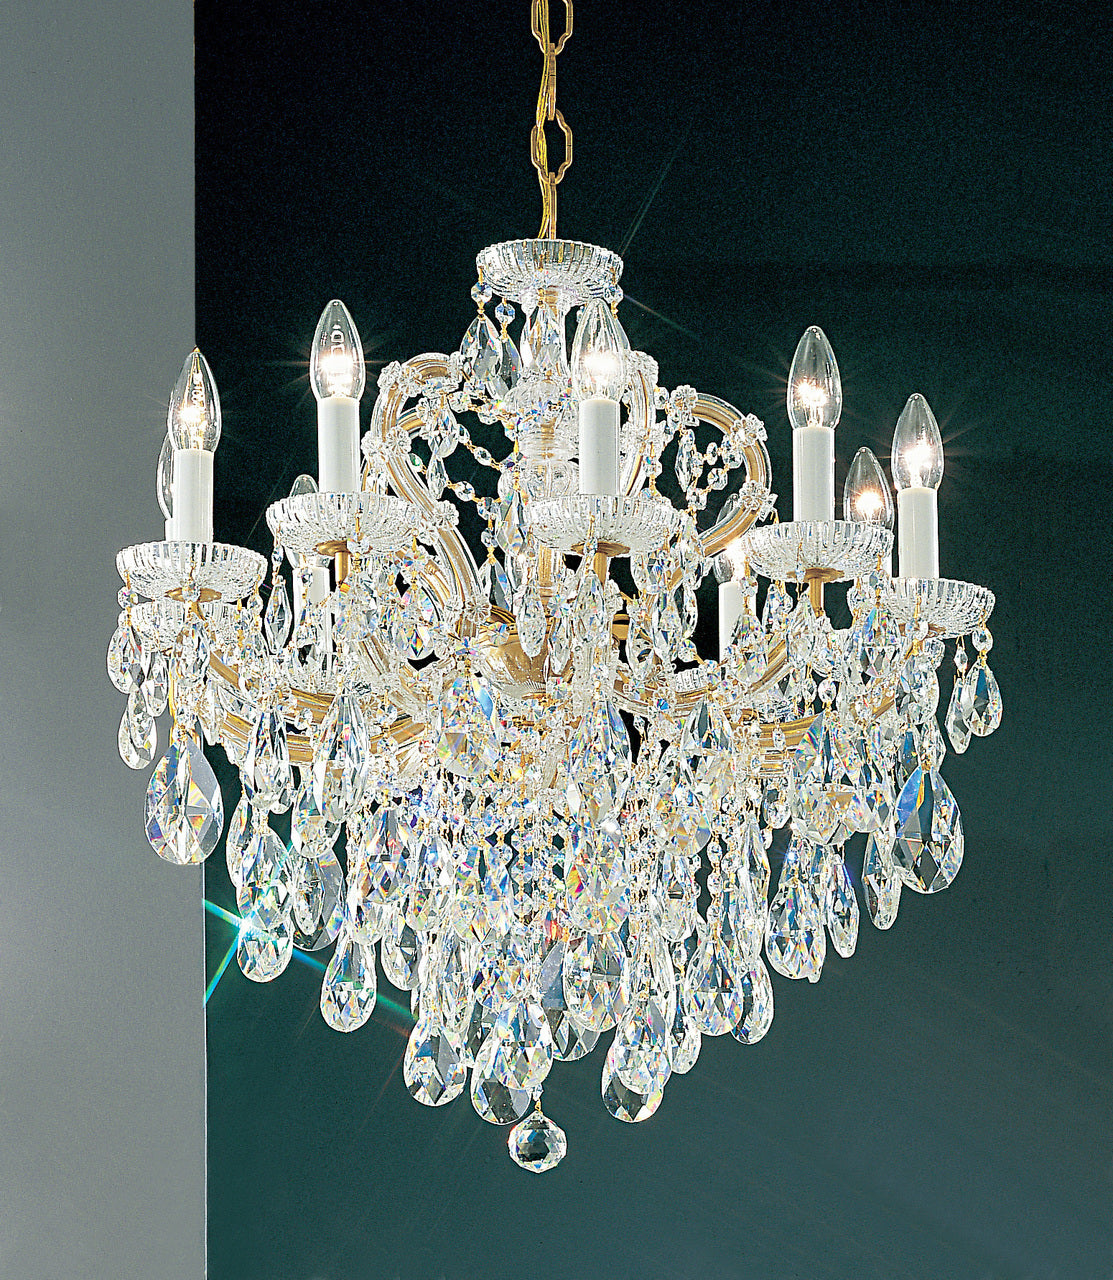 Classic Lighting 8120 OWG C Maria Theresa Traditional Crystal Chandelier in Olde World Gold (Imported from Italy)